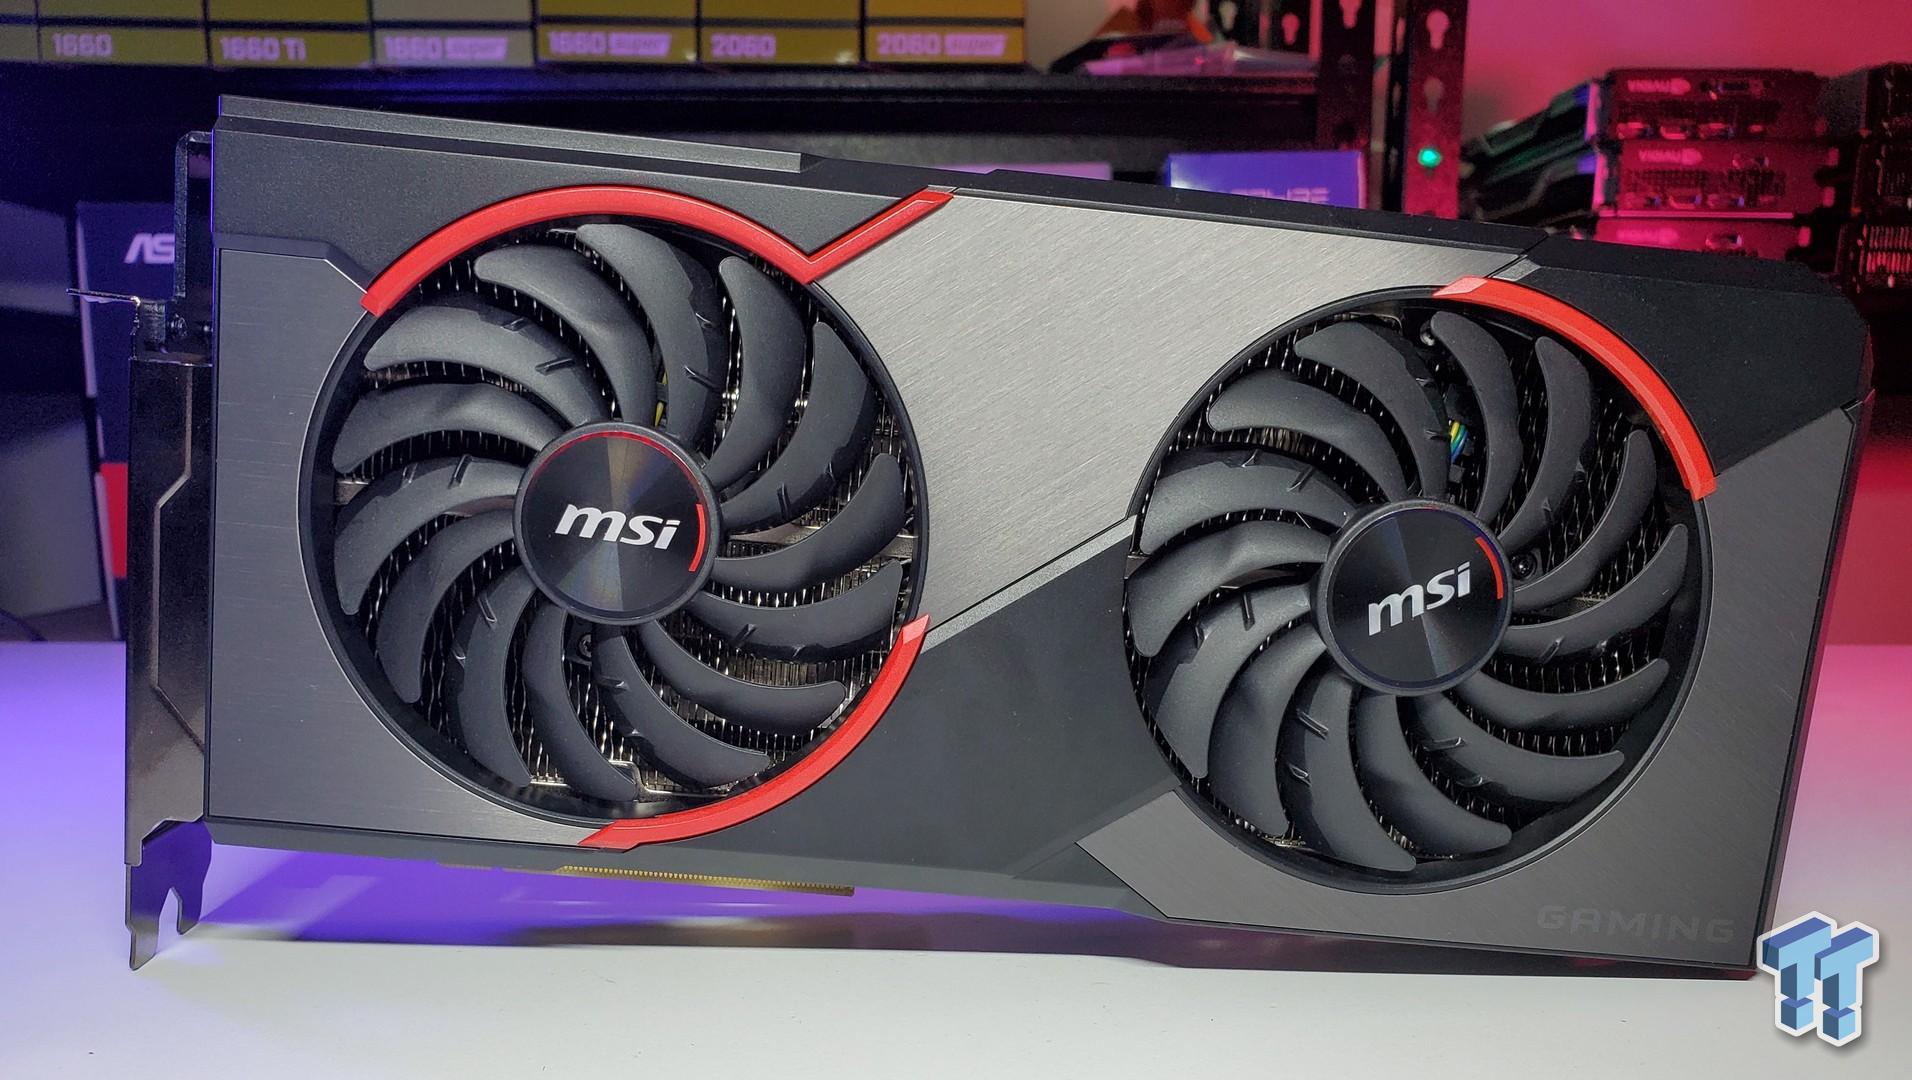 MSI Radeon RX 5600 XT GAMING X Review: Please Update Your BIOS